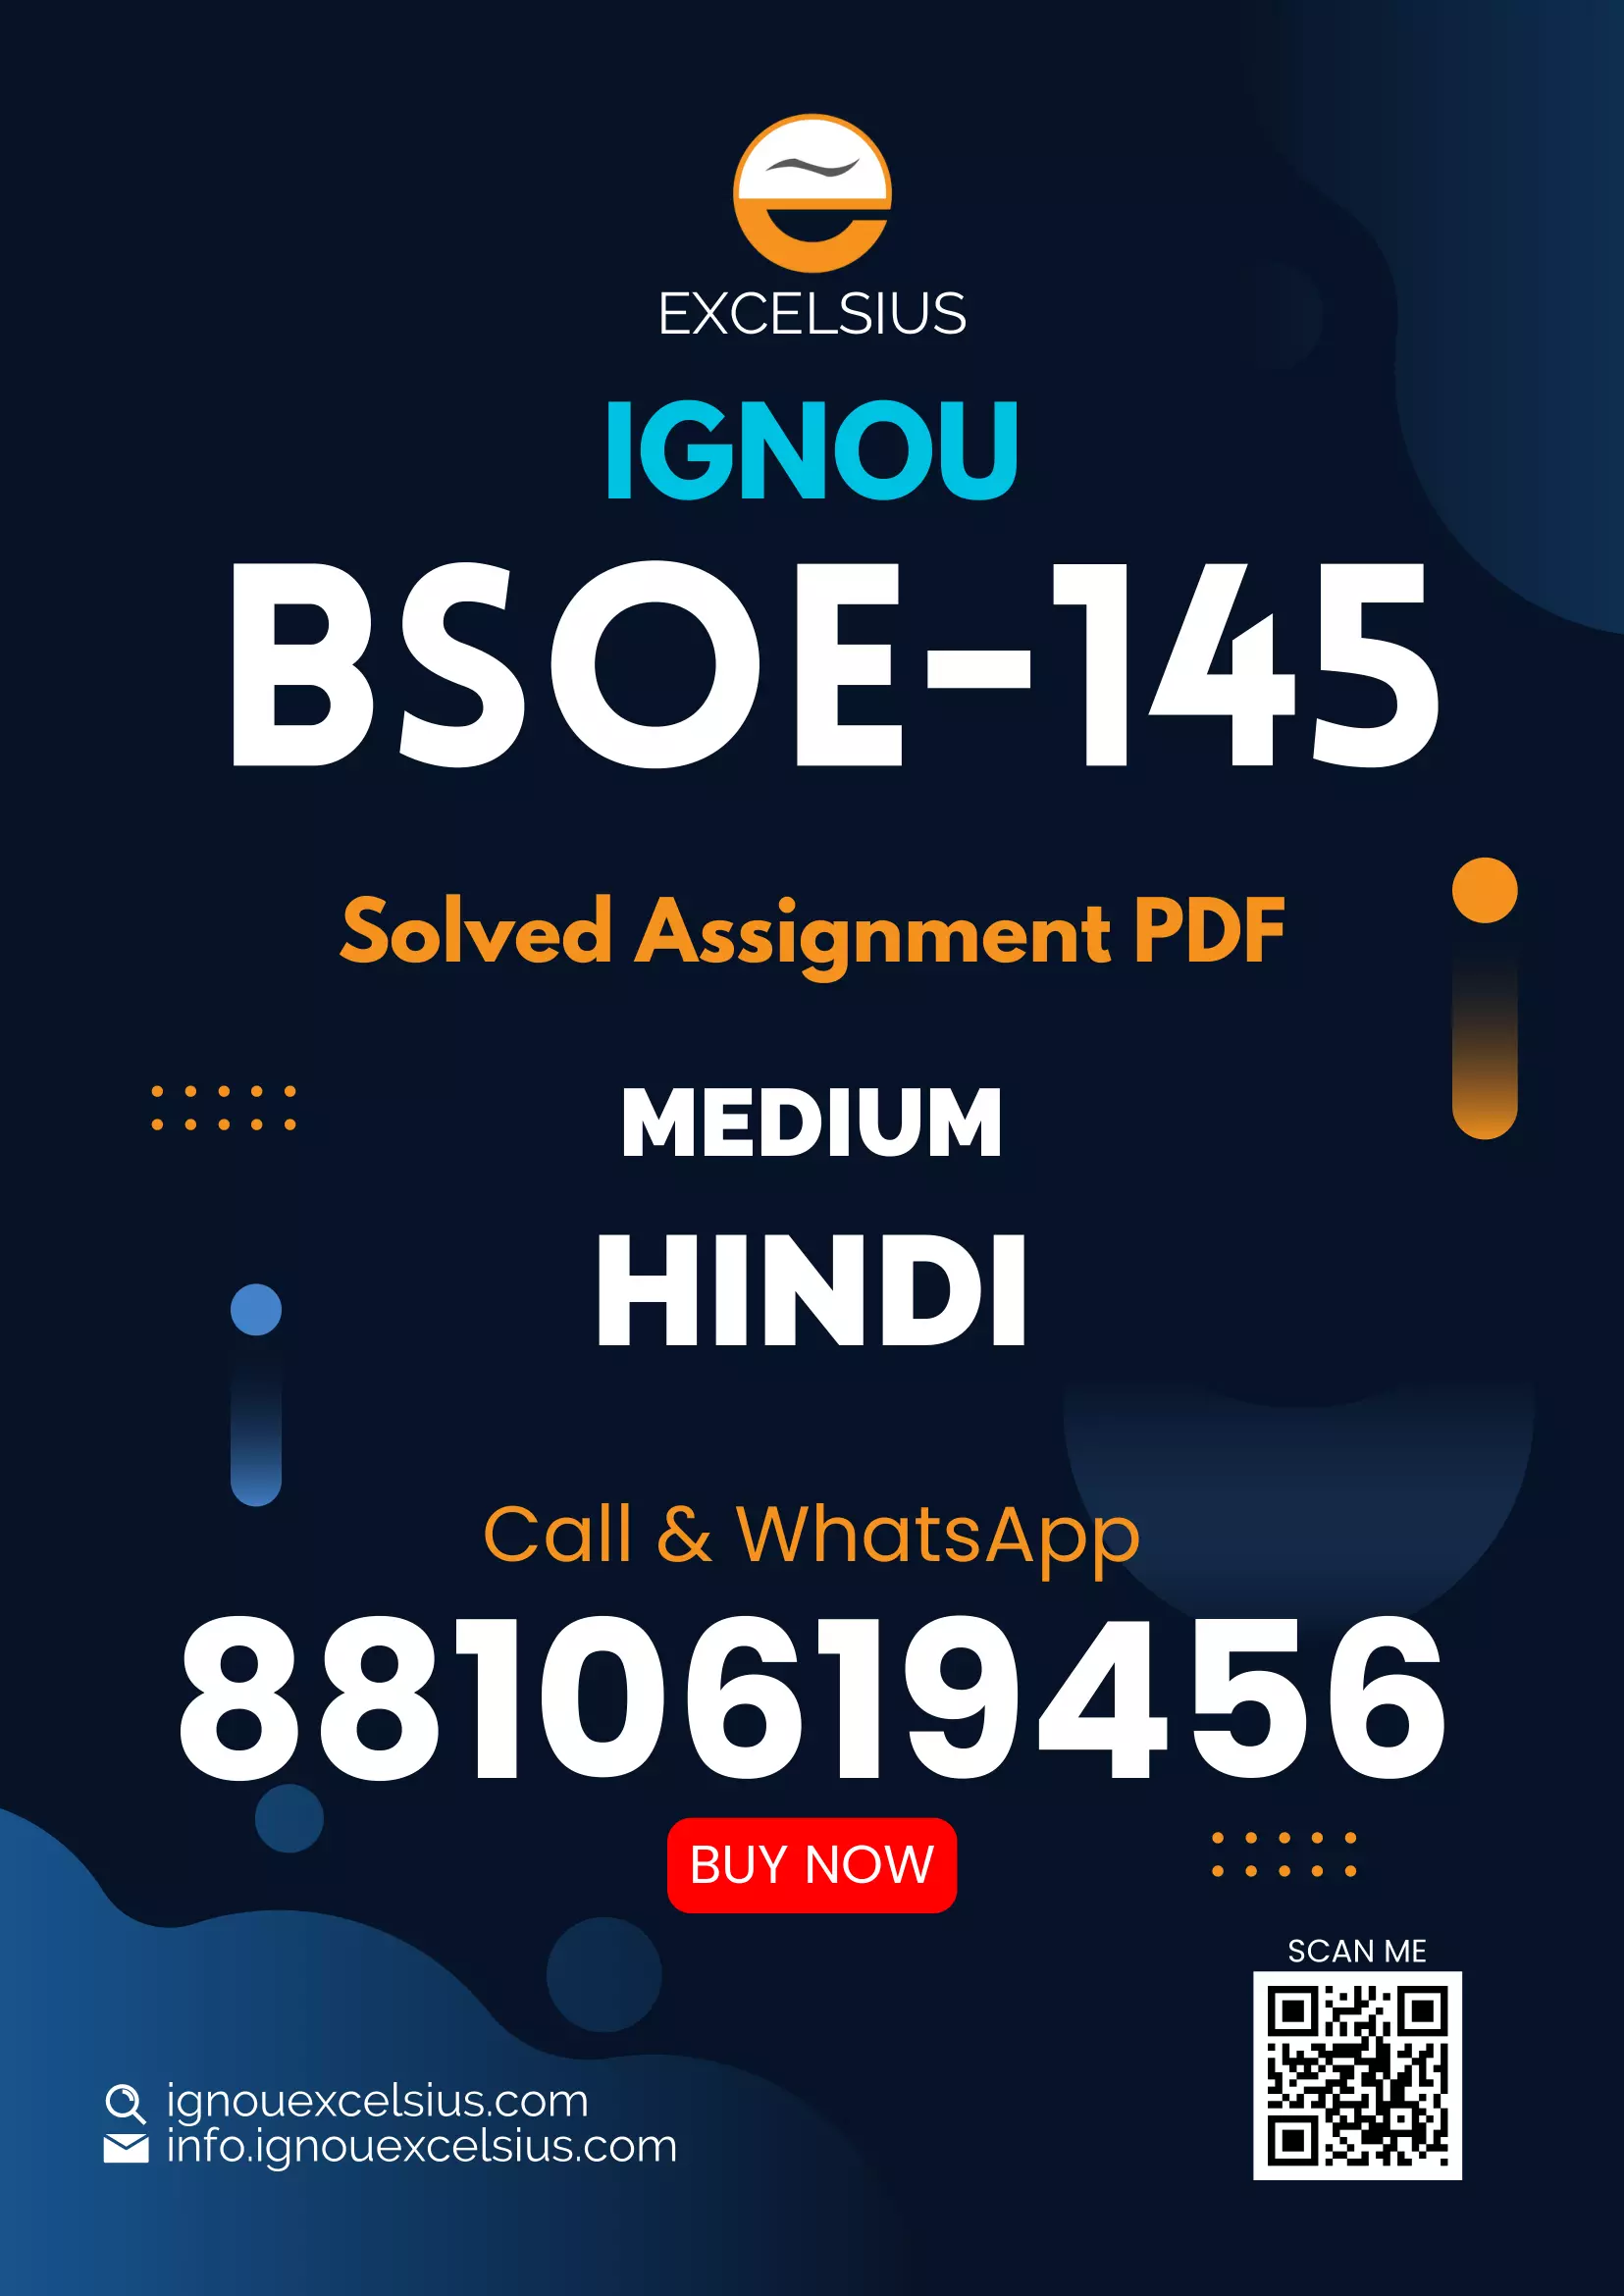 IGNOU BSOE-145 - Religion and Society, Latest Solved Assignment-July 2022 – January 2023